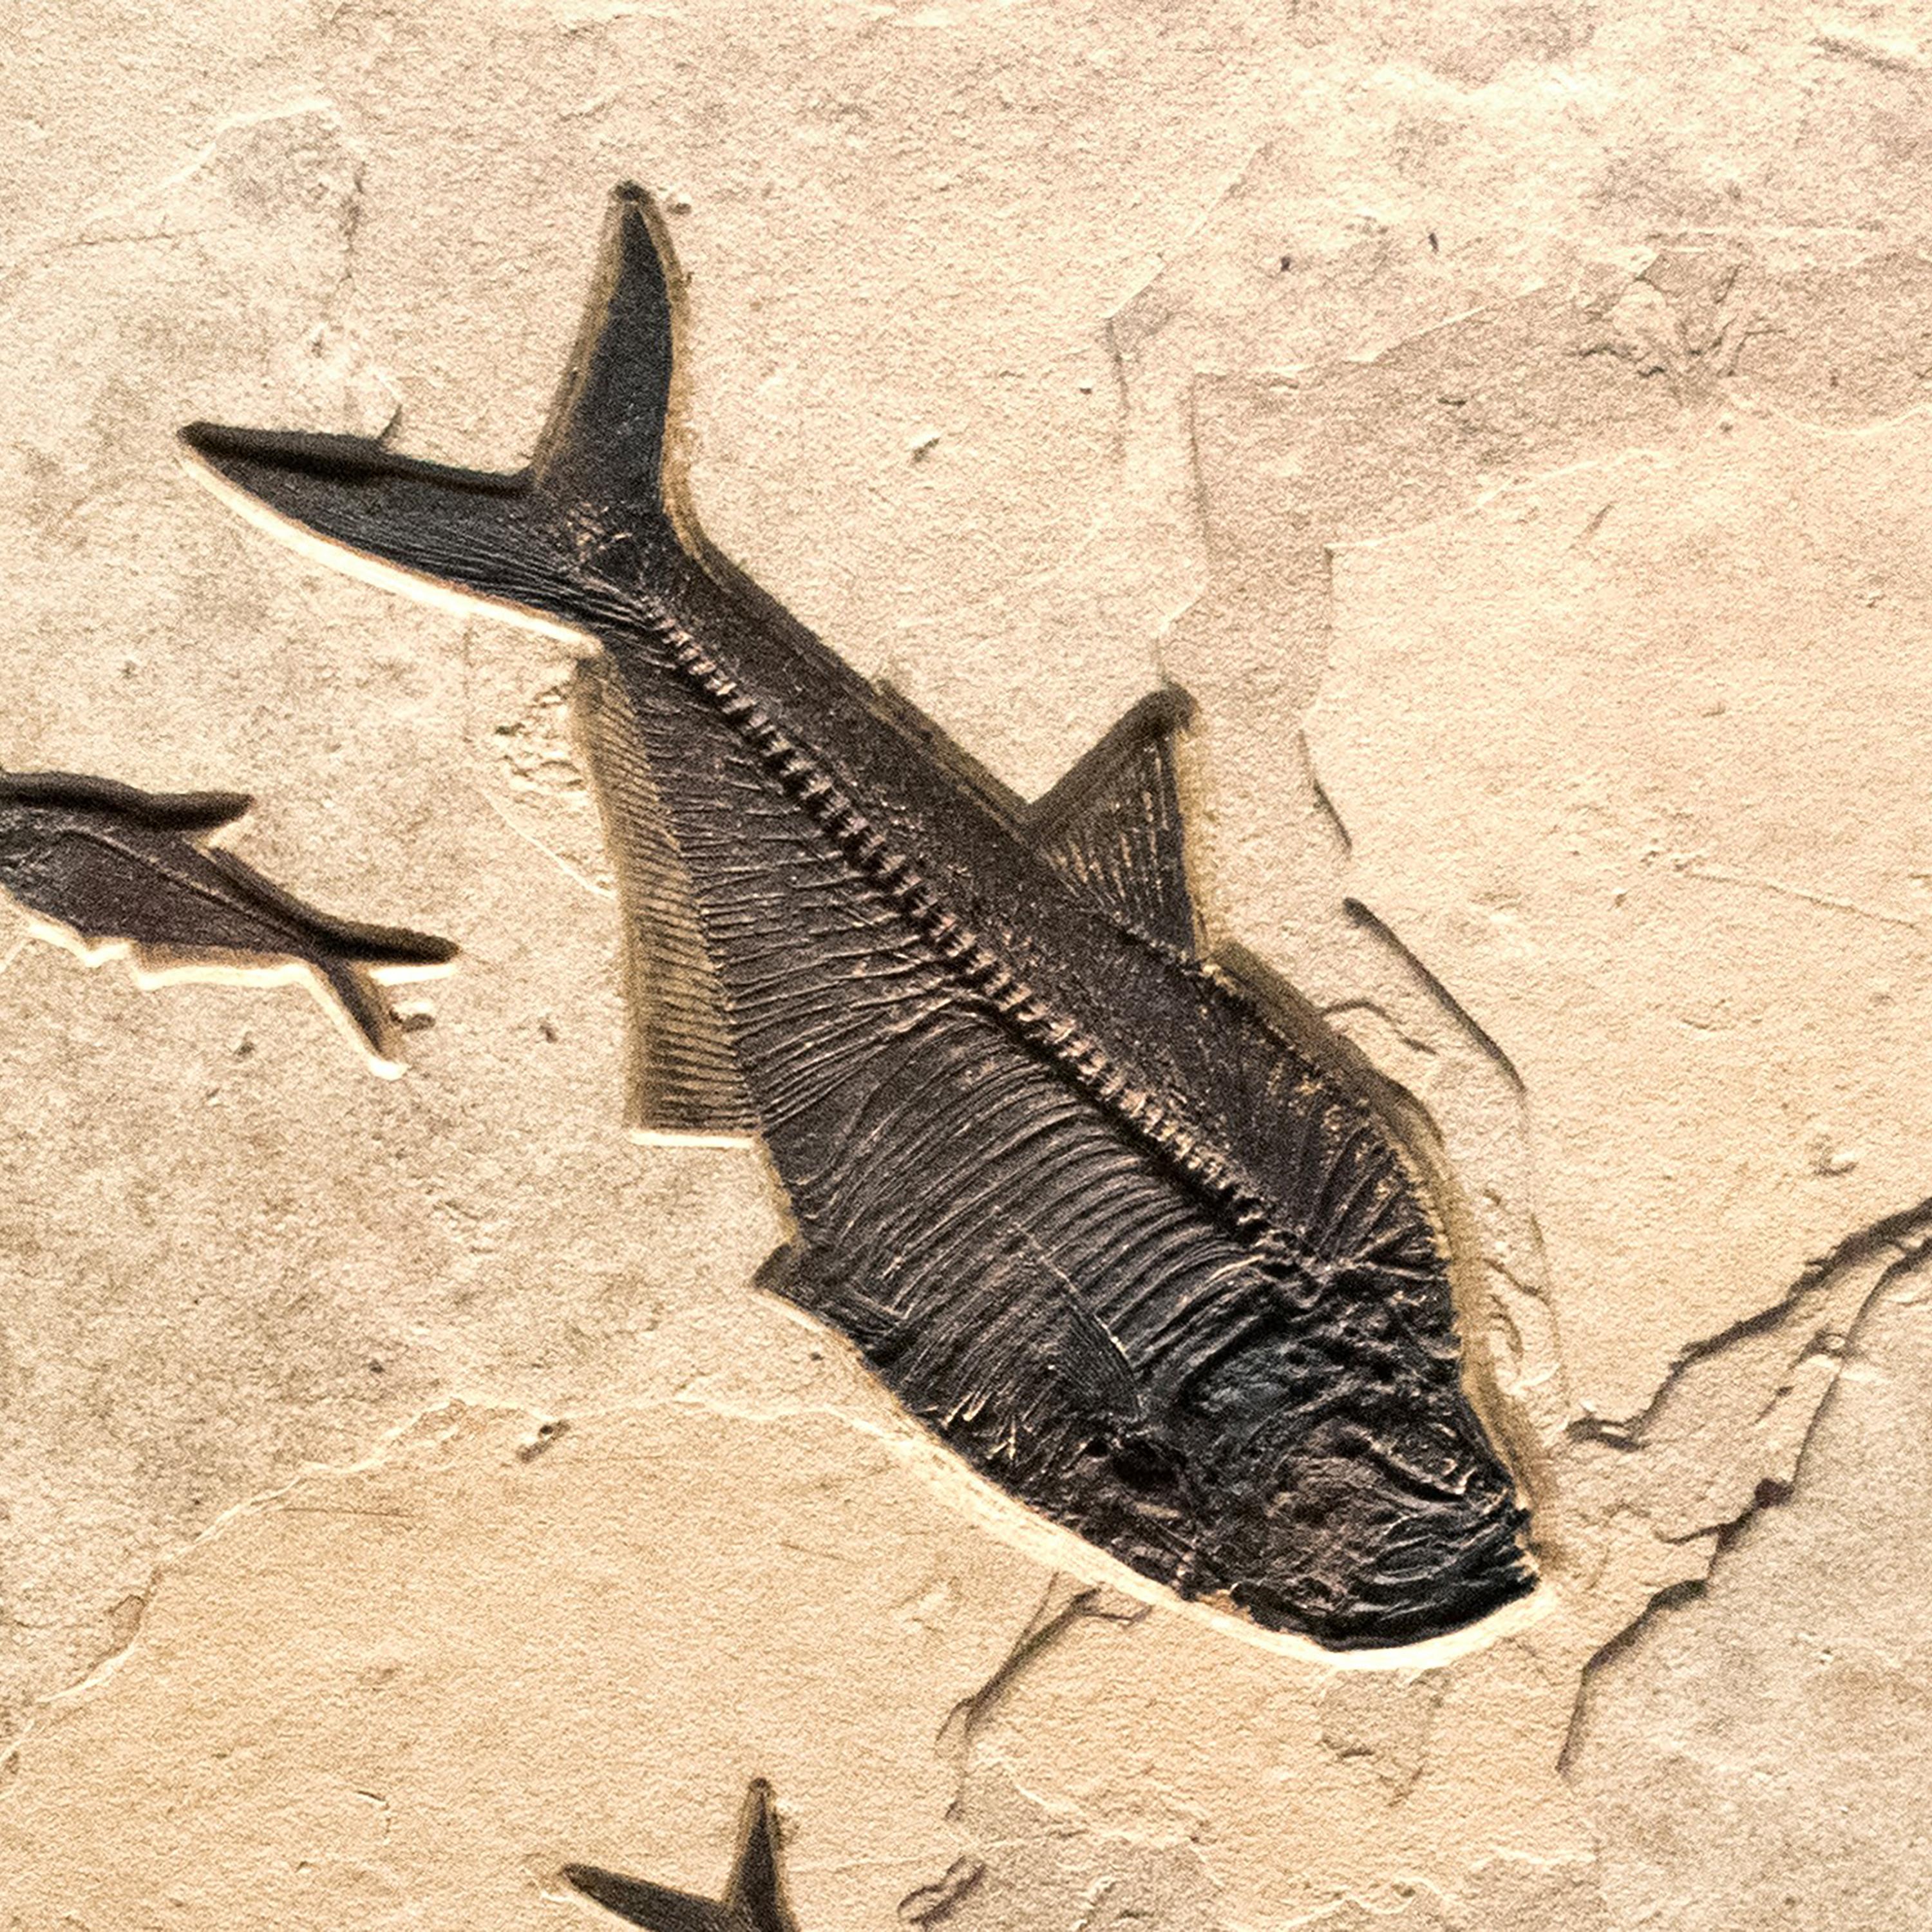 Organic Material 50 Million Year Old Eocene Era Fossil Fish Triptych in Stone, from Wyoming